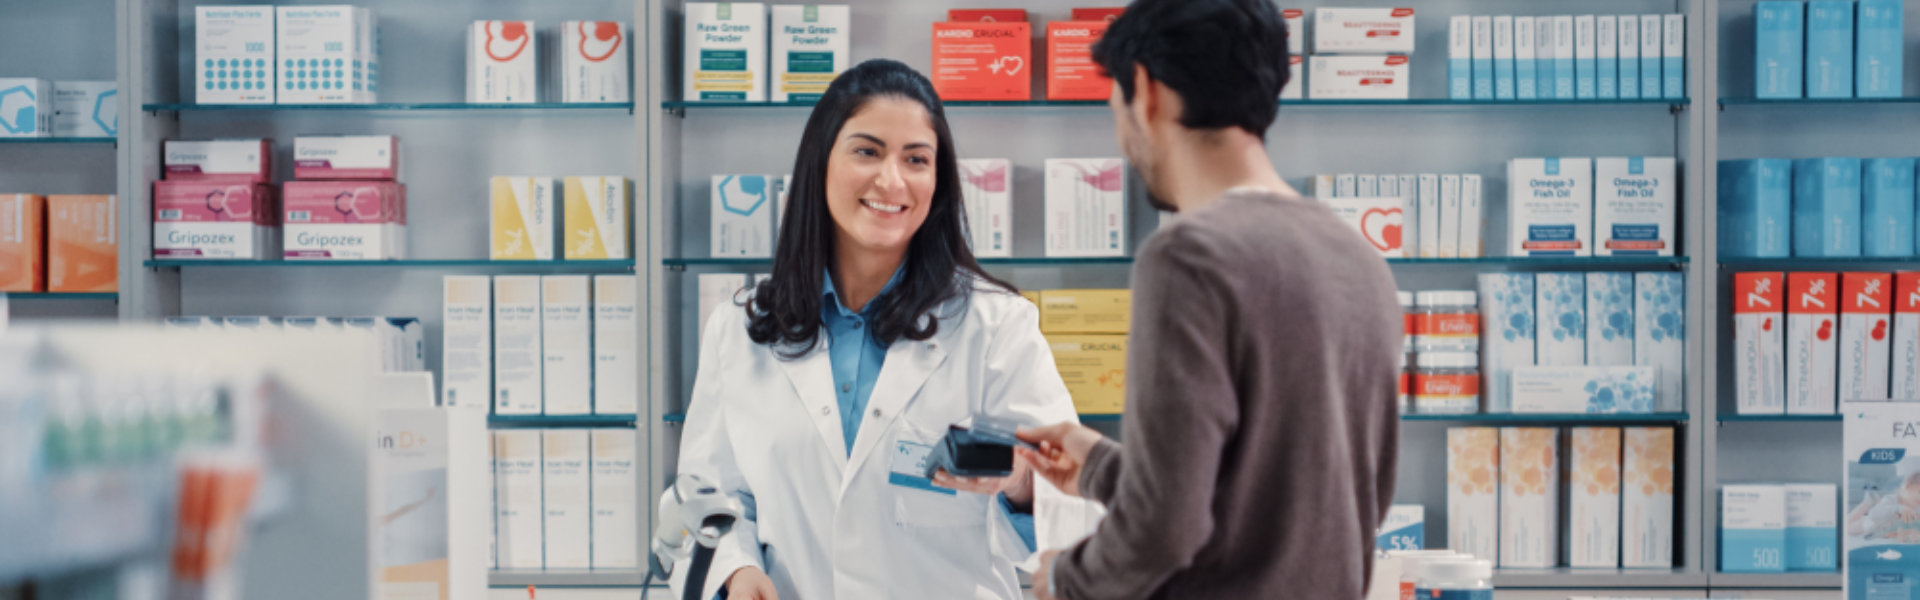 pharmacist talking to the guy